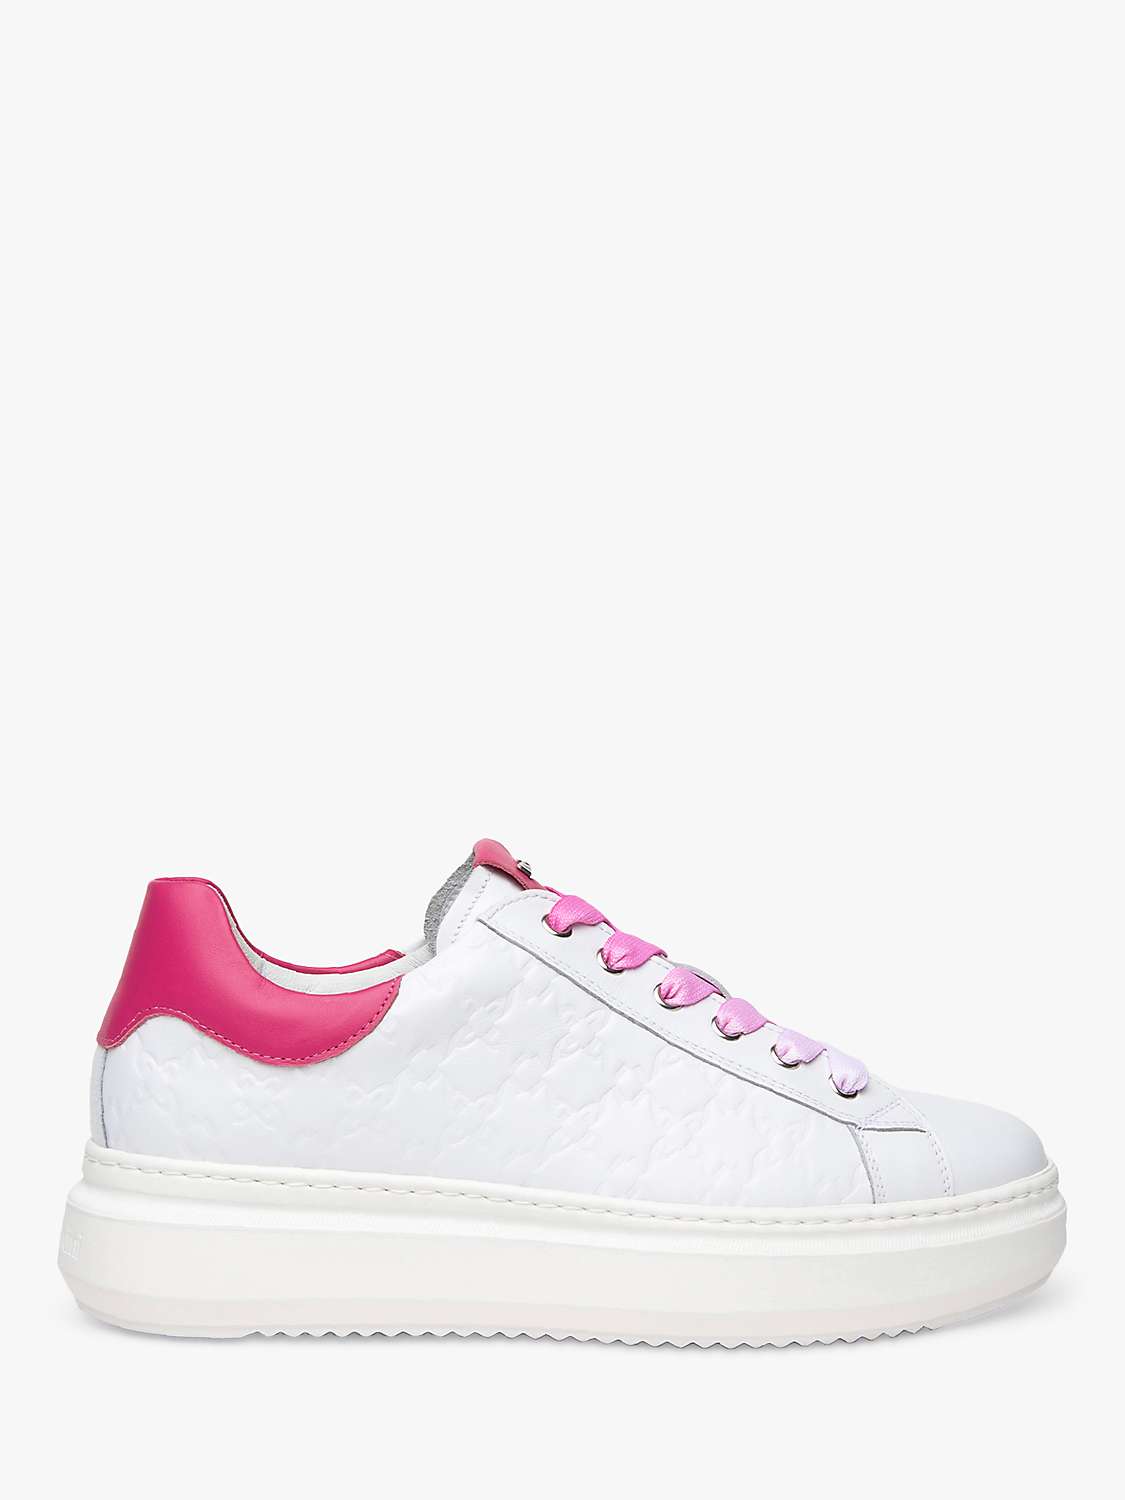 Buy NeroGiardini Leather Lace Up Trainers, White/Pink Online at johnlewis.com